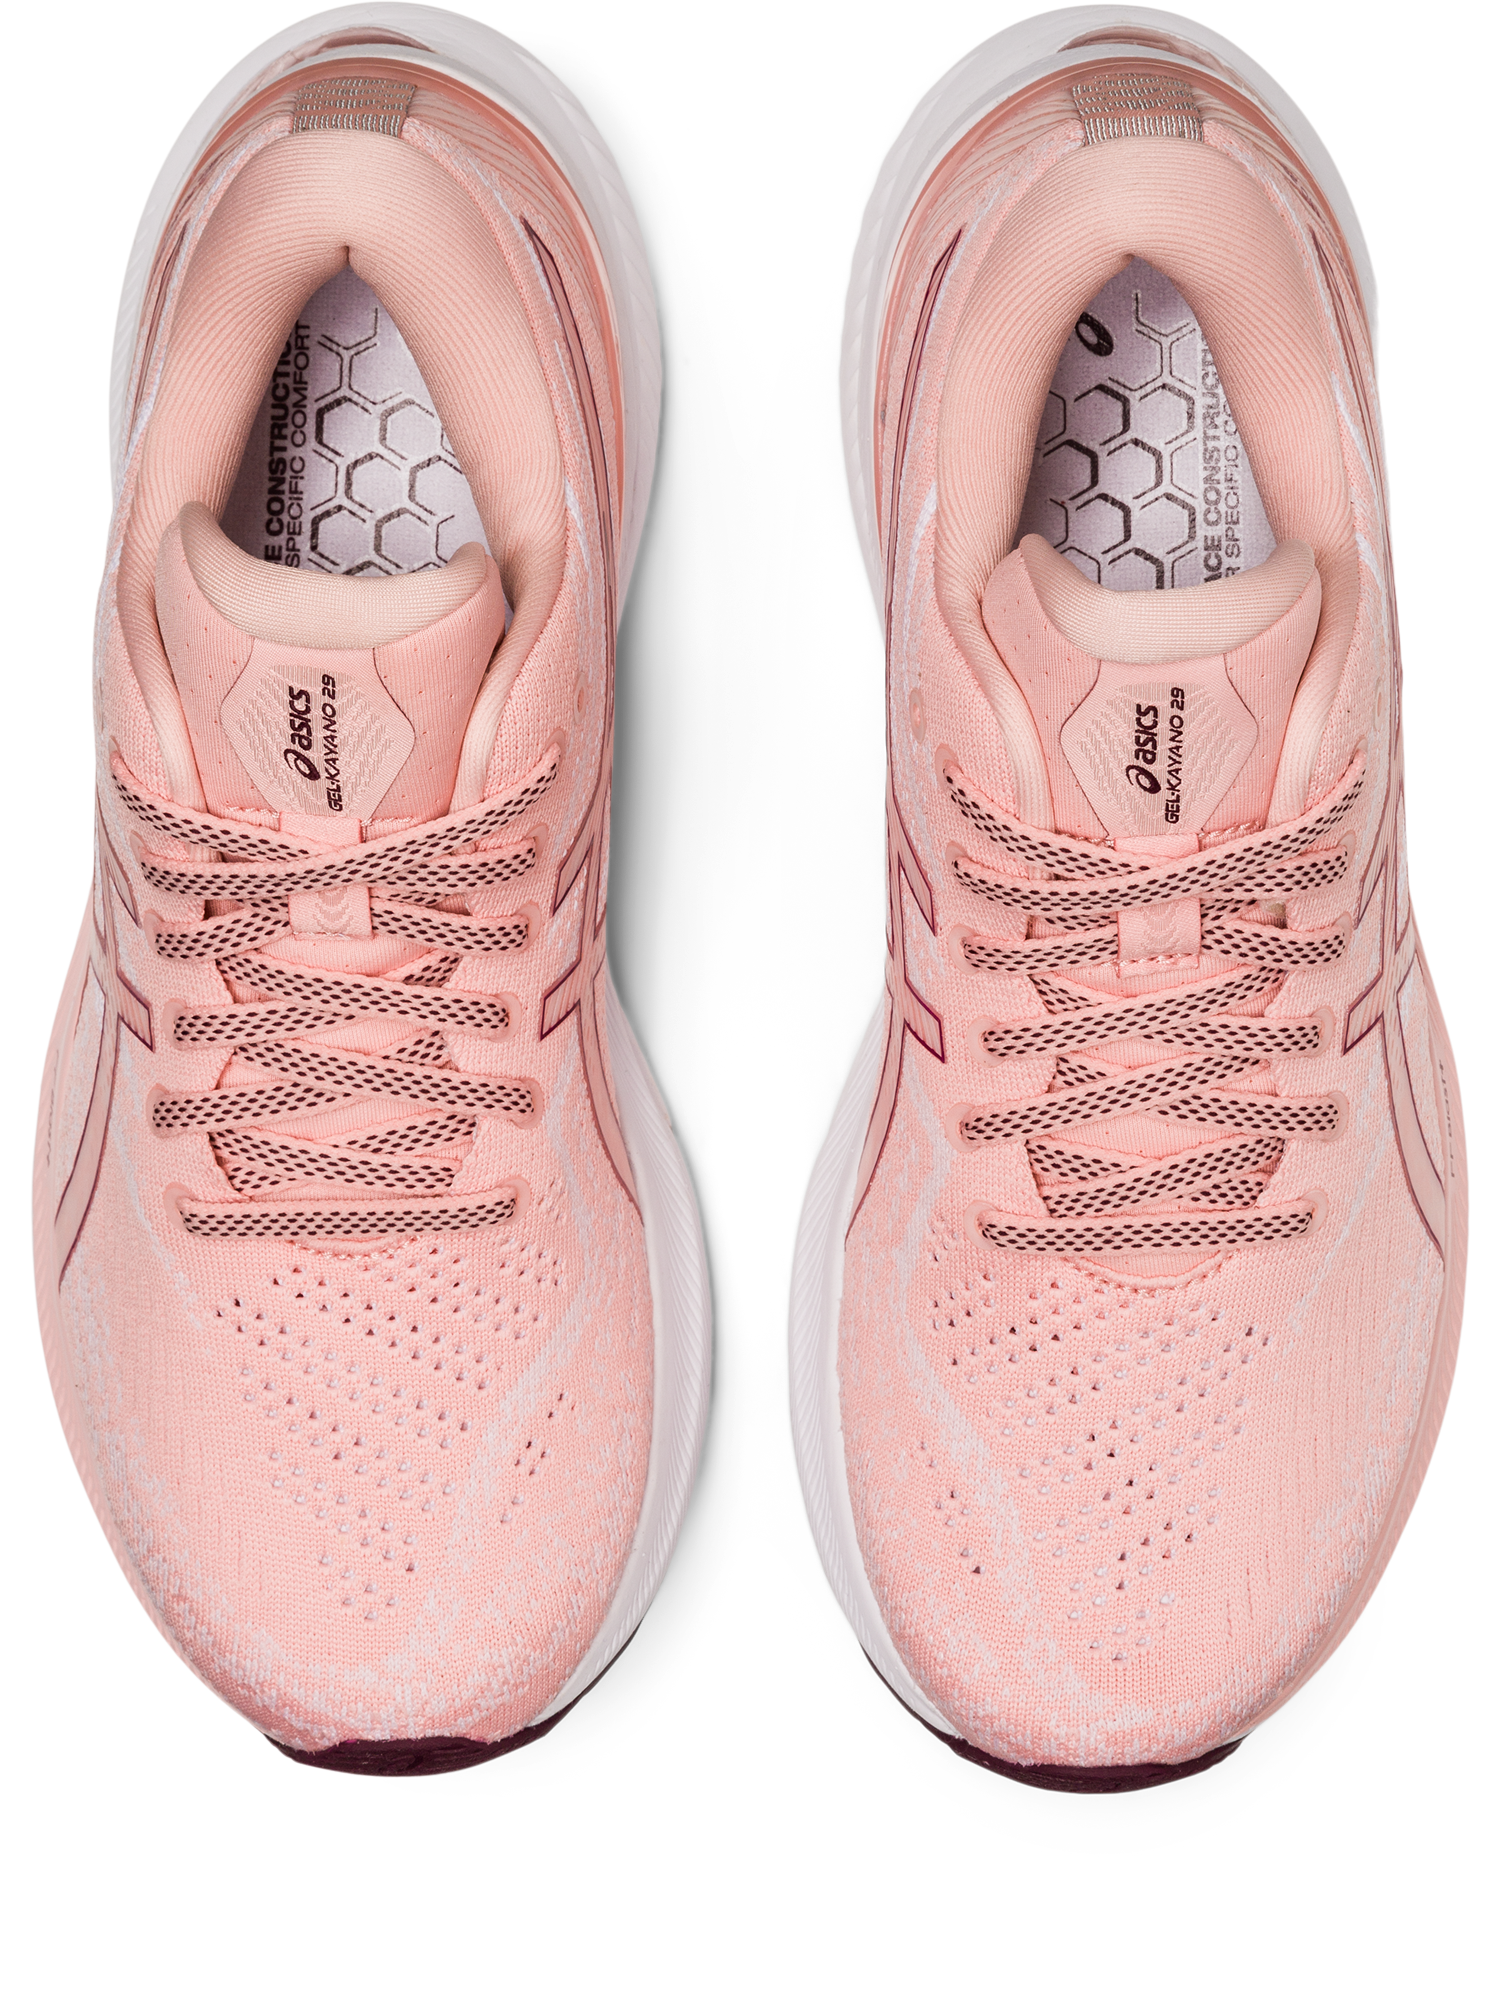 Asics Women's Gel-Kayano 29 Running Shoes in Frosted Rose/Deep Mars